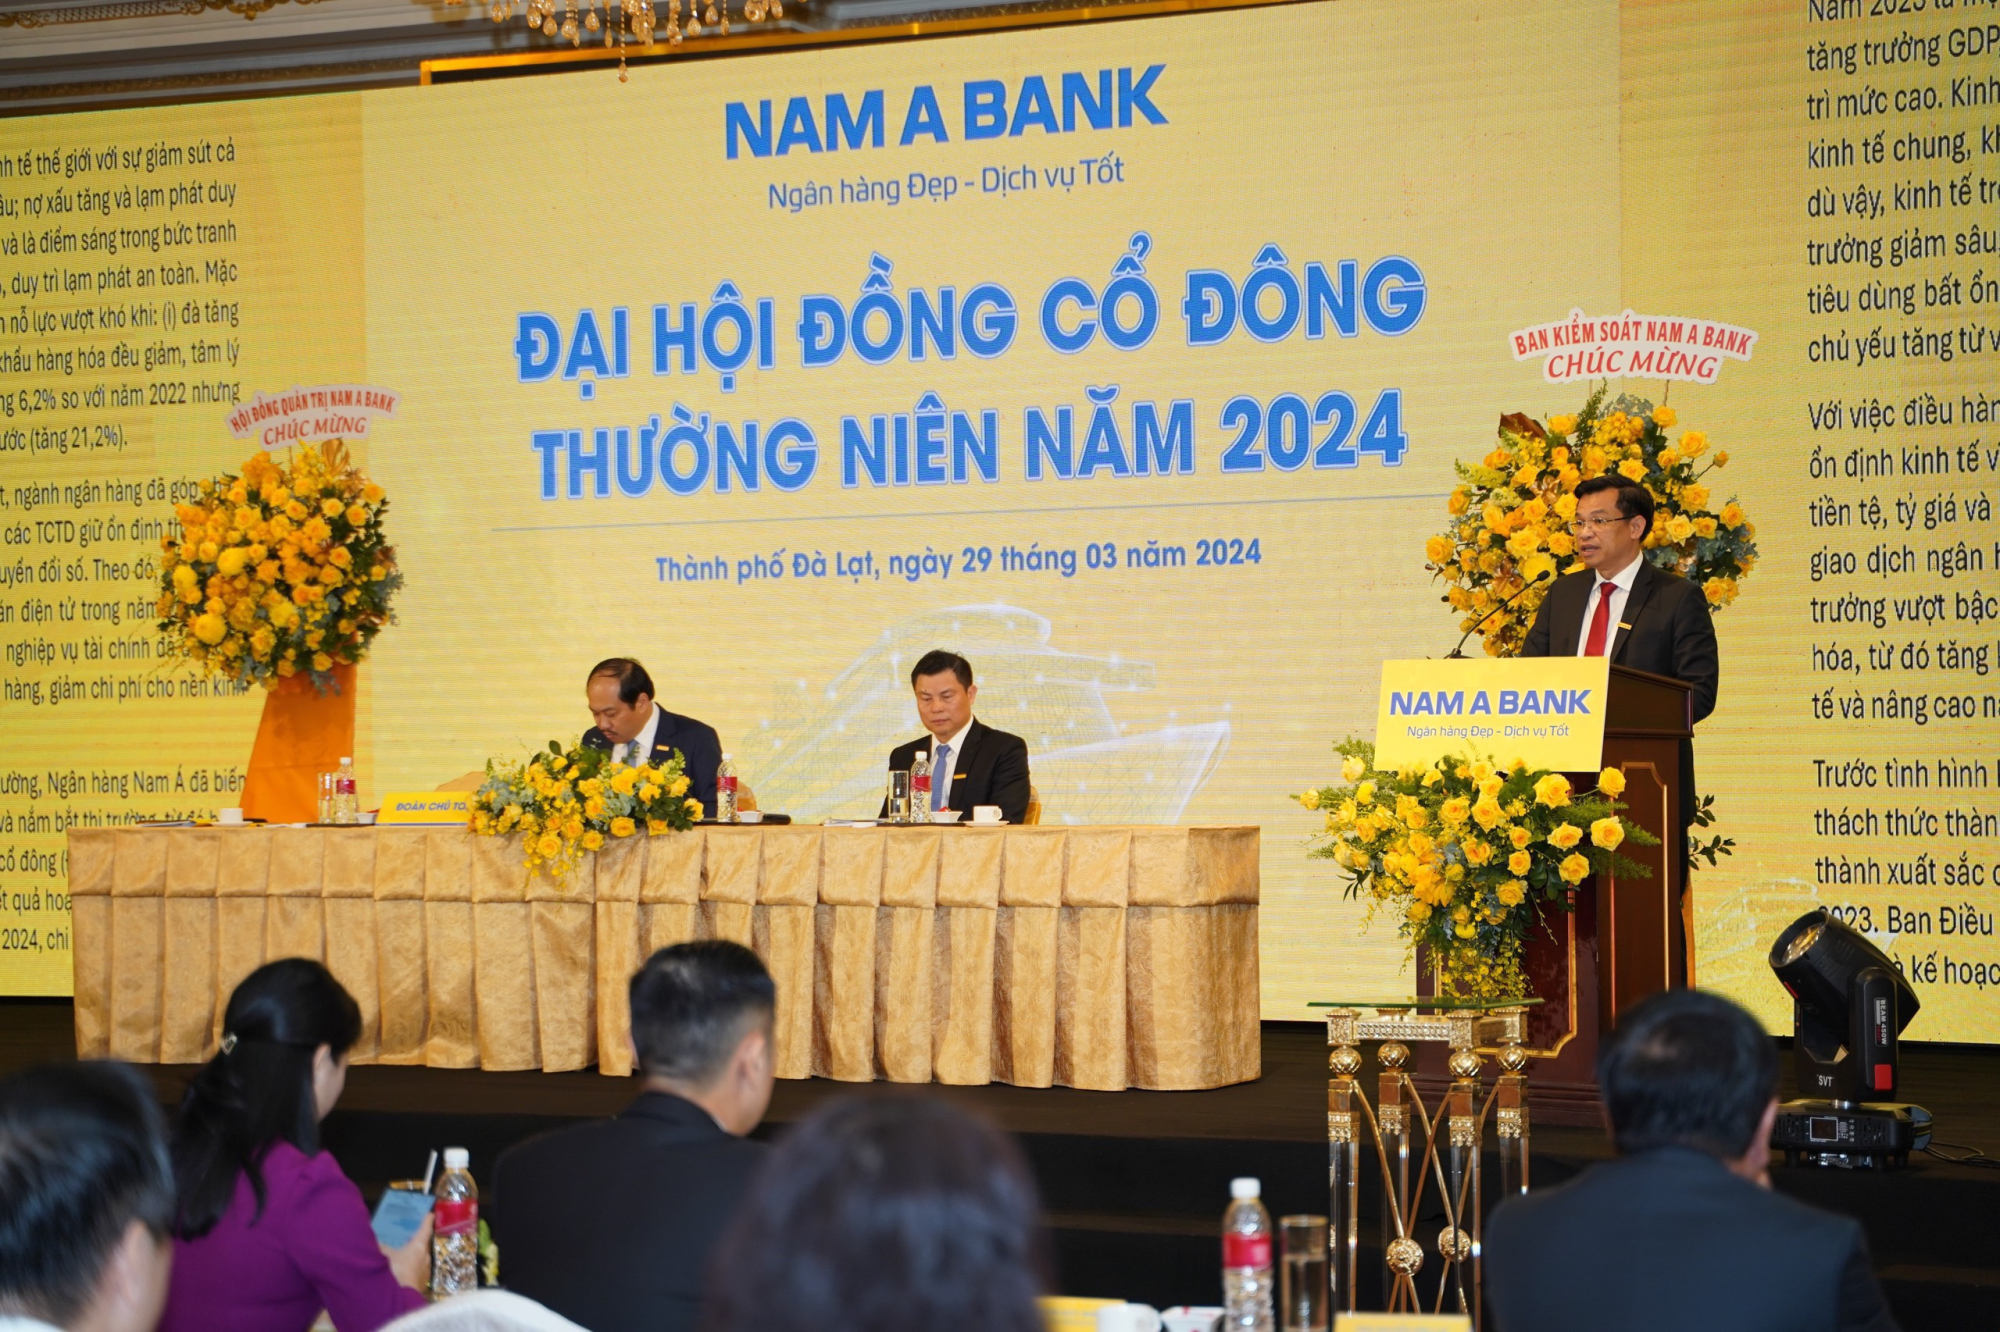 nam a bank to chuc thanh cong dai hoi dong co dong thuong nien nam 2024 voi nhung quyet sach chien luoc hinh 2